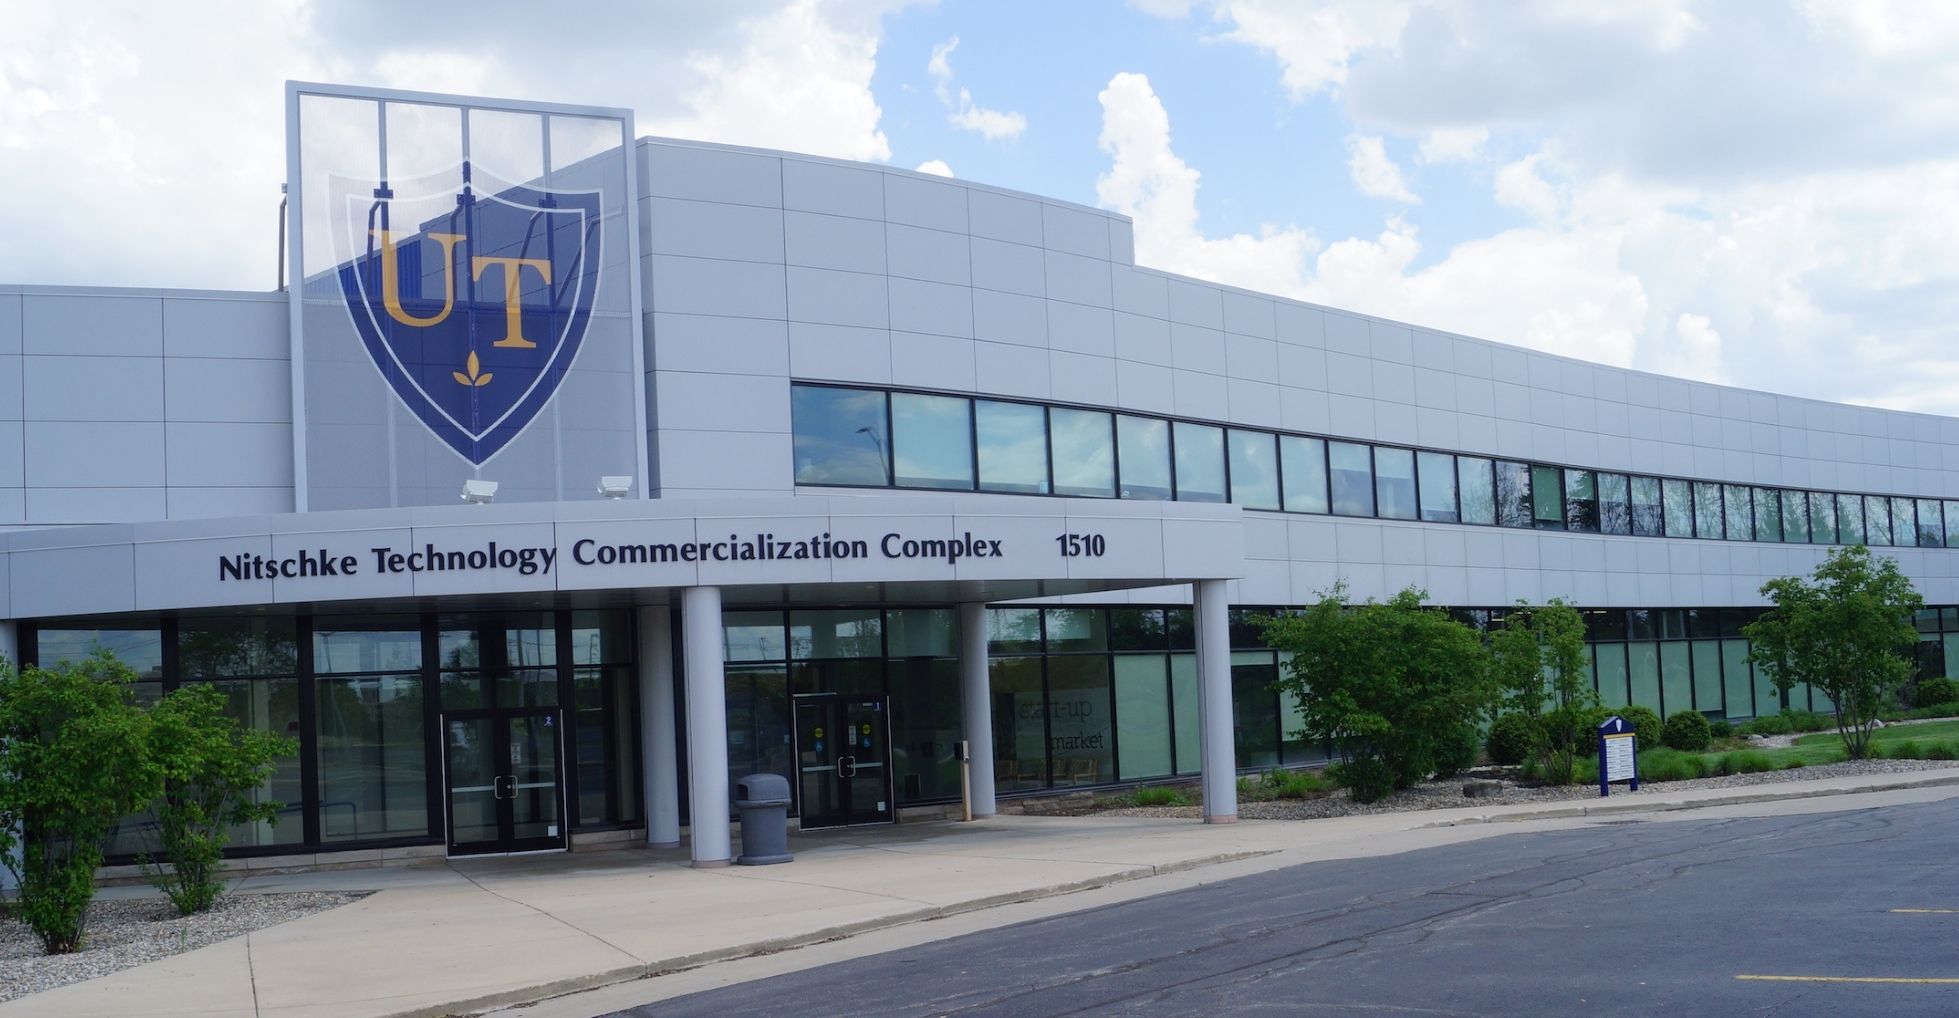 Nitschke Technology and Commercialization Complex